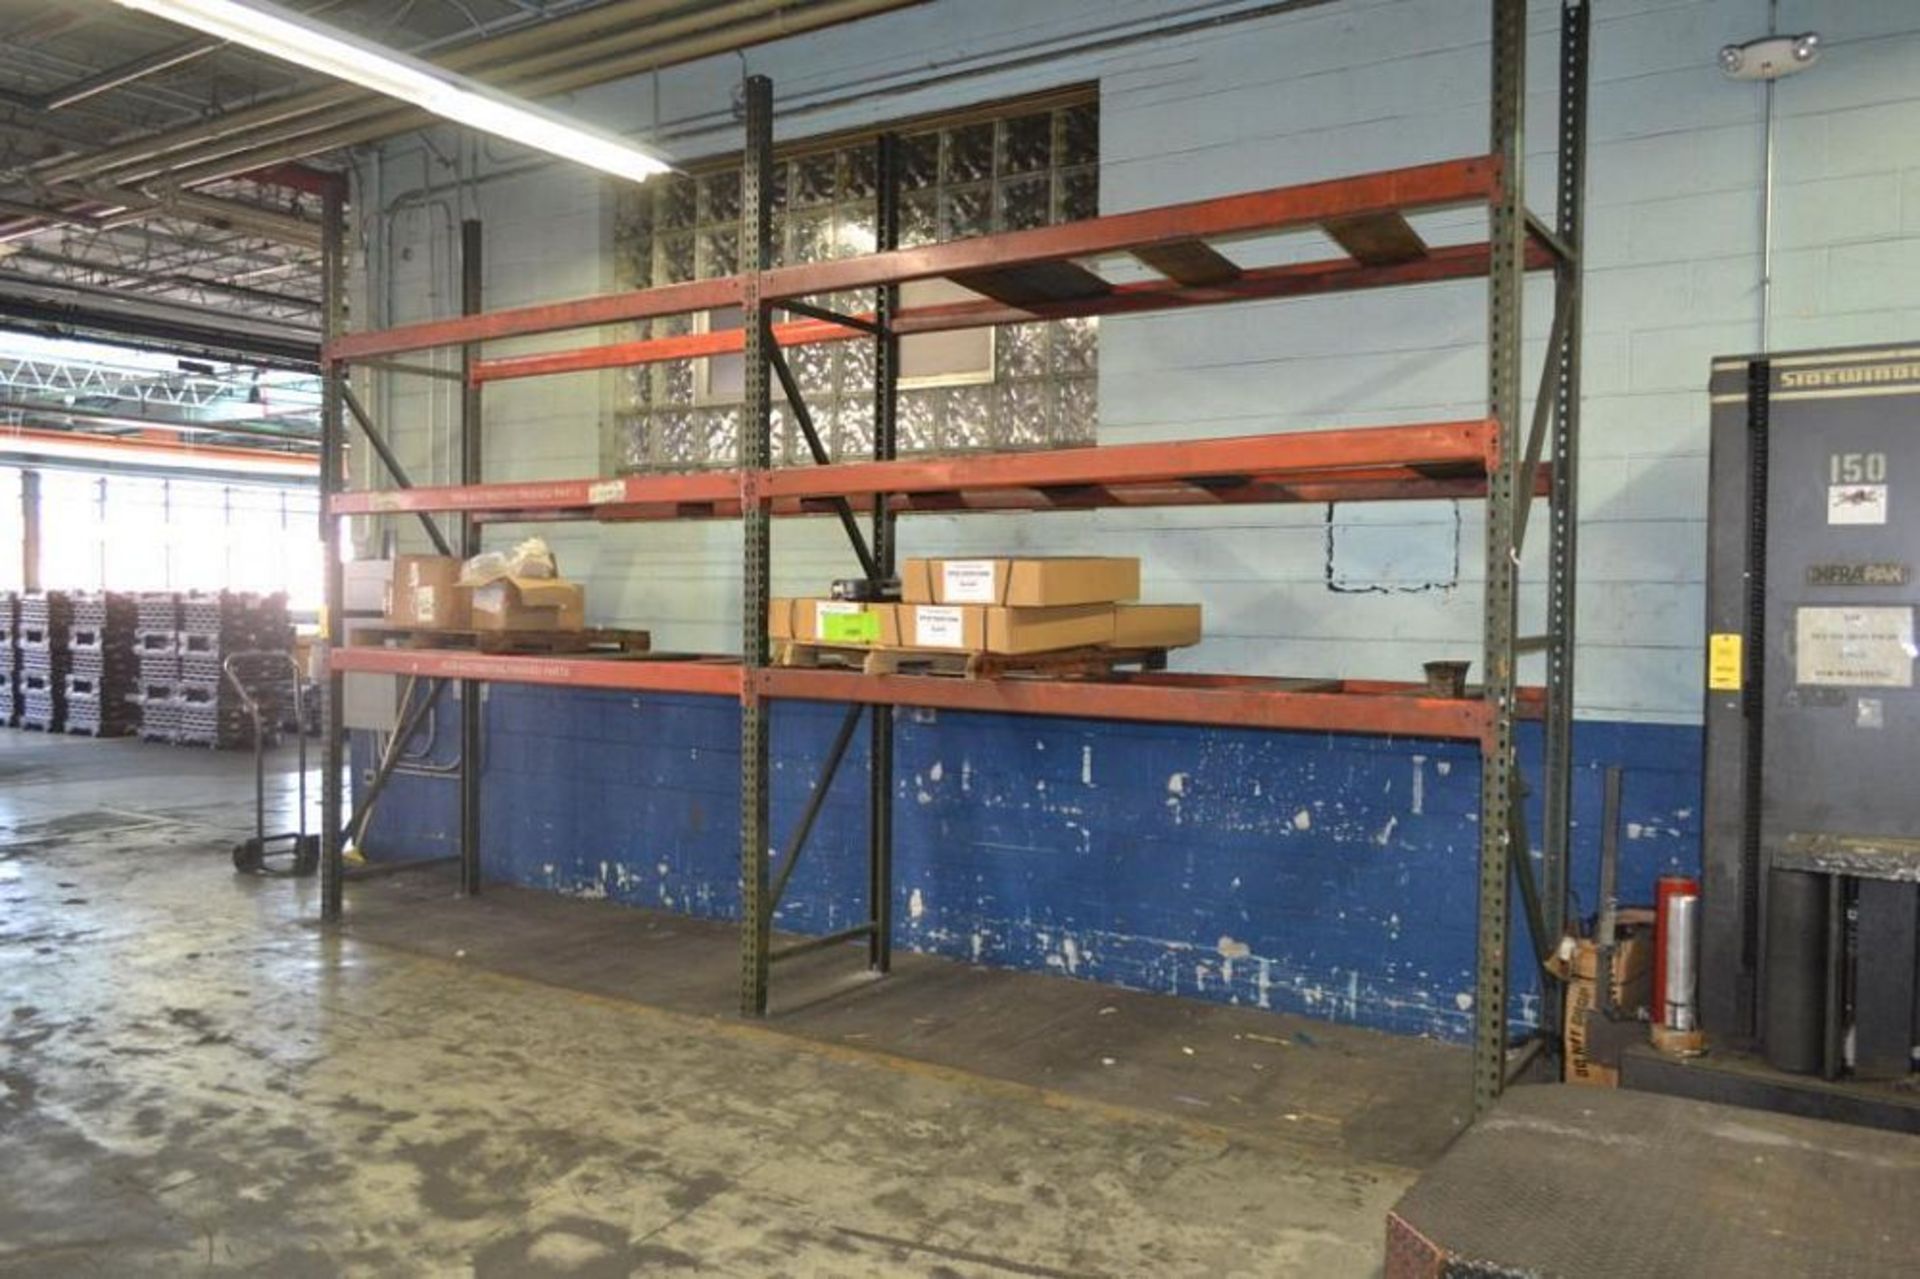 LOT: (2) Sections 12 ft. High x 9 ft. Wide x 36 in. Deep Pallet Rack, Foremans Station, with Packing